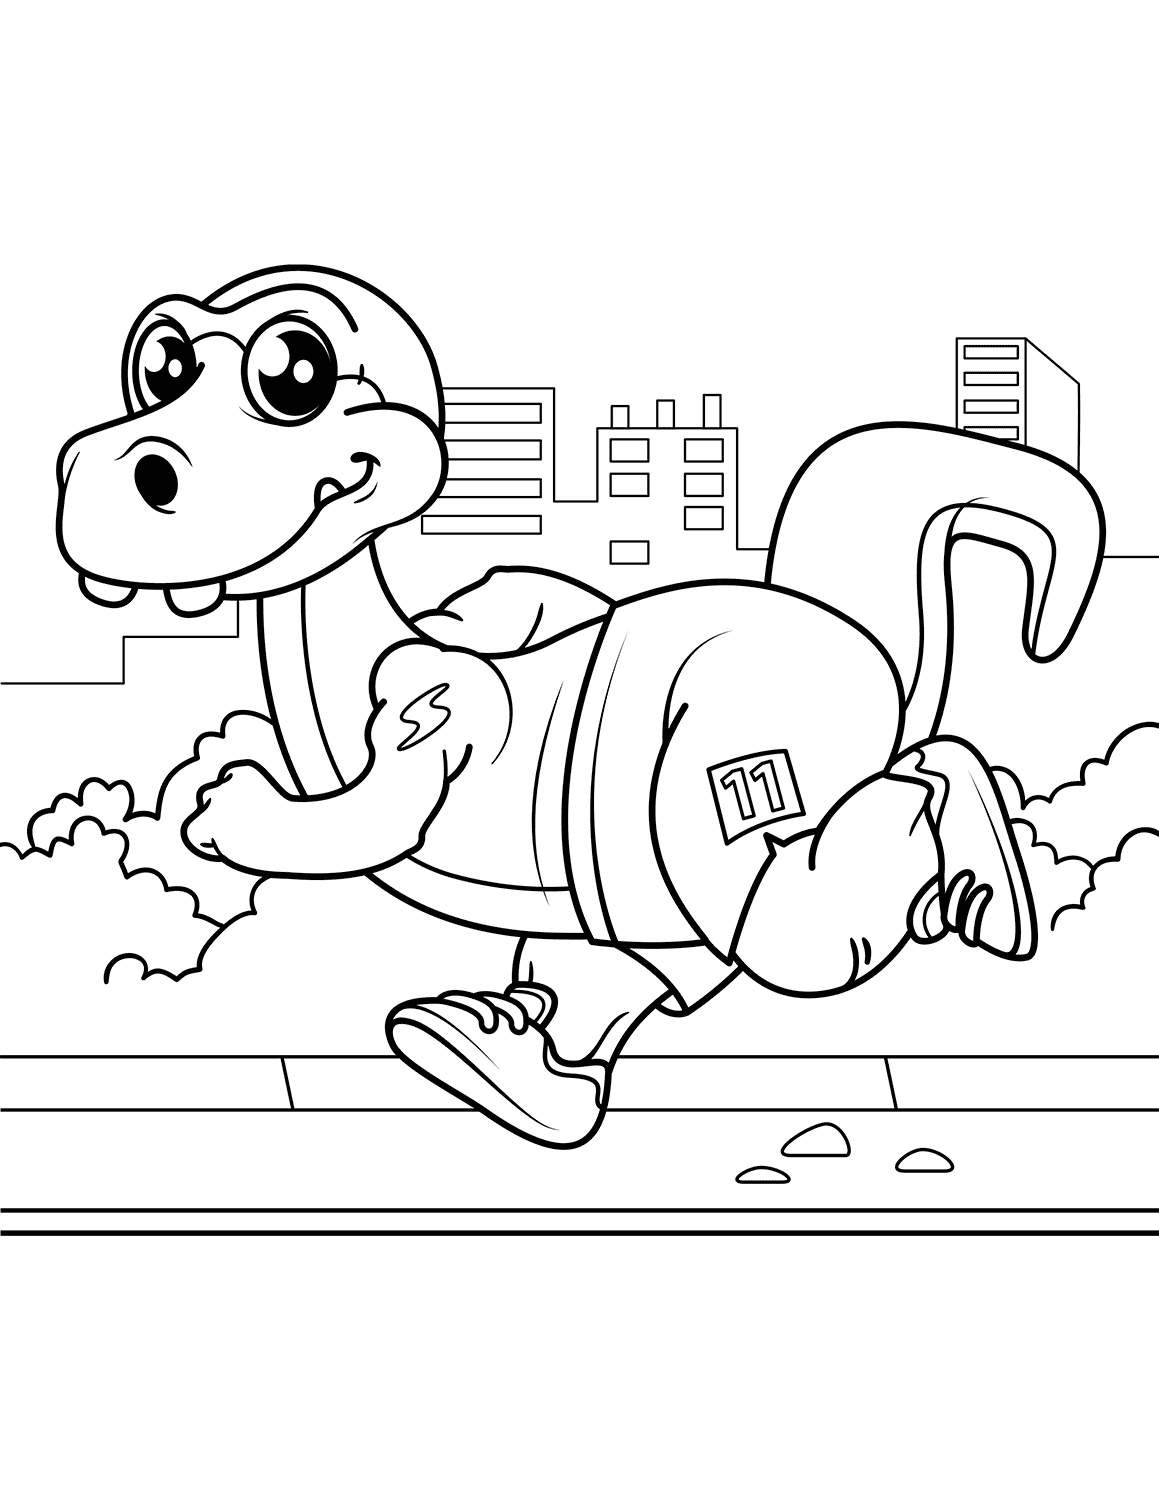 Cute Dinosaur runner Coloring Page